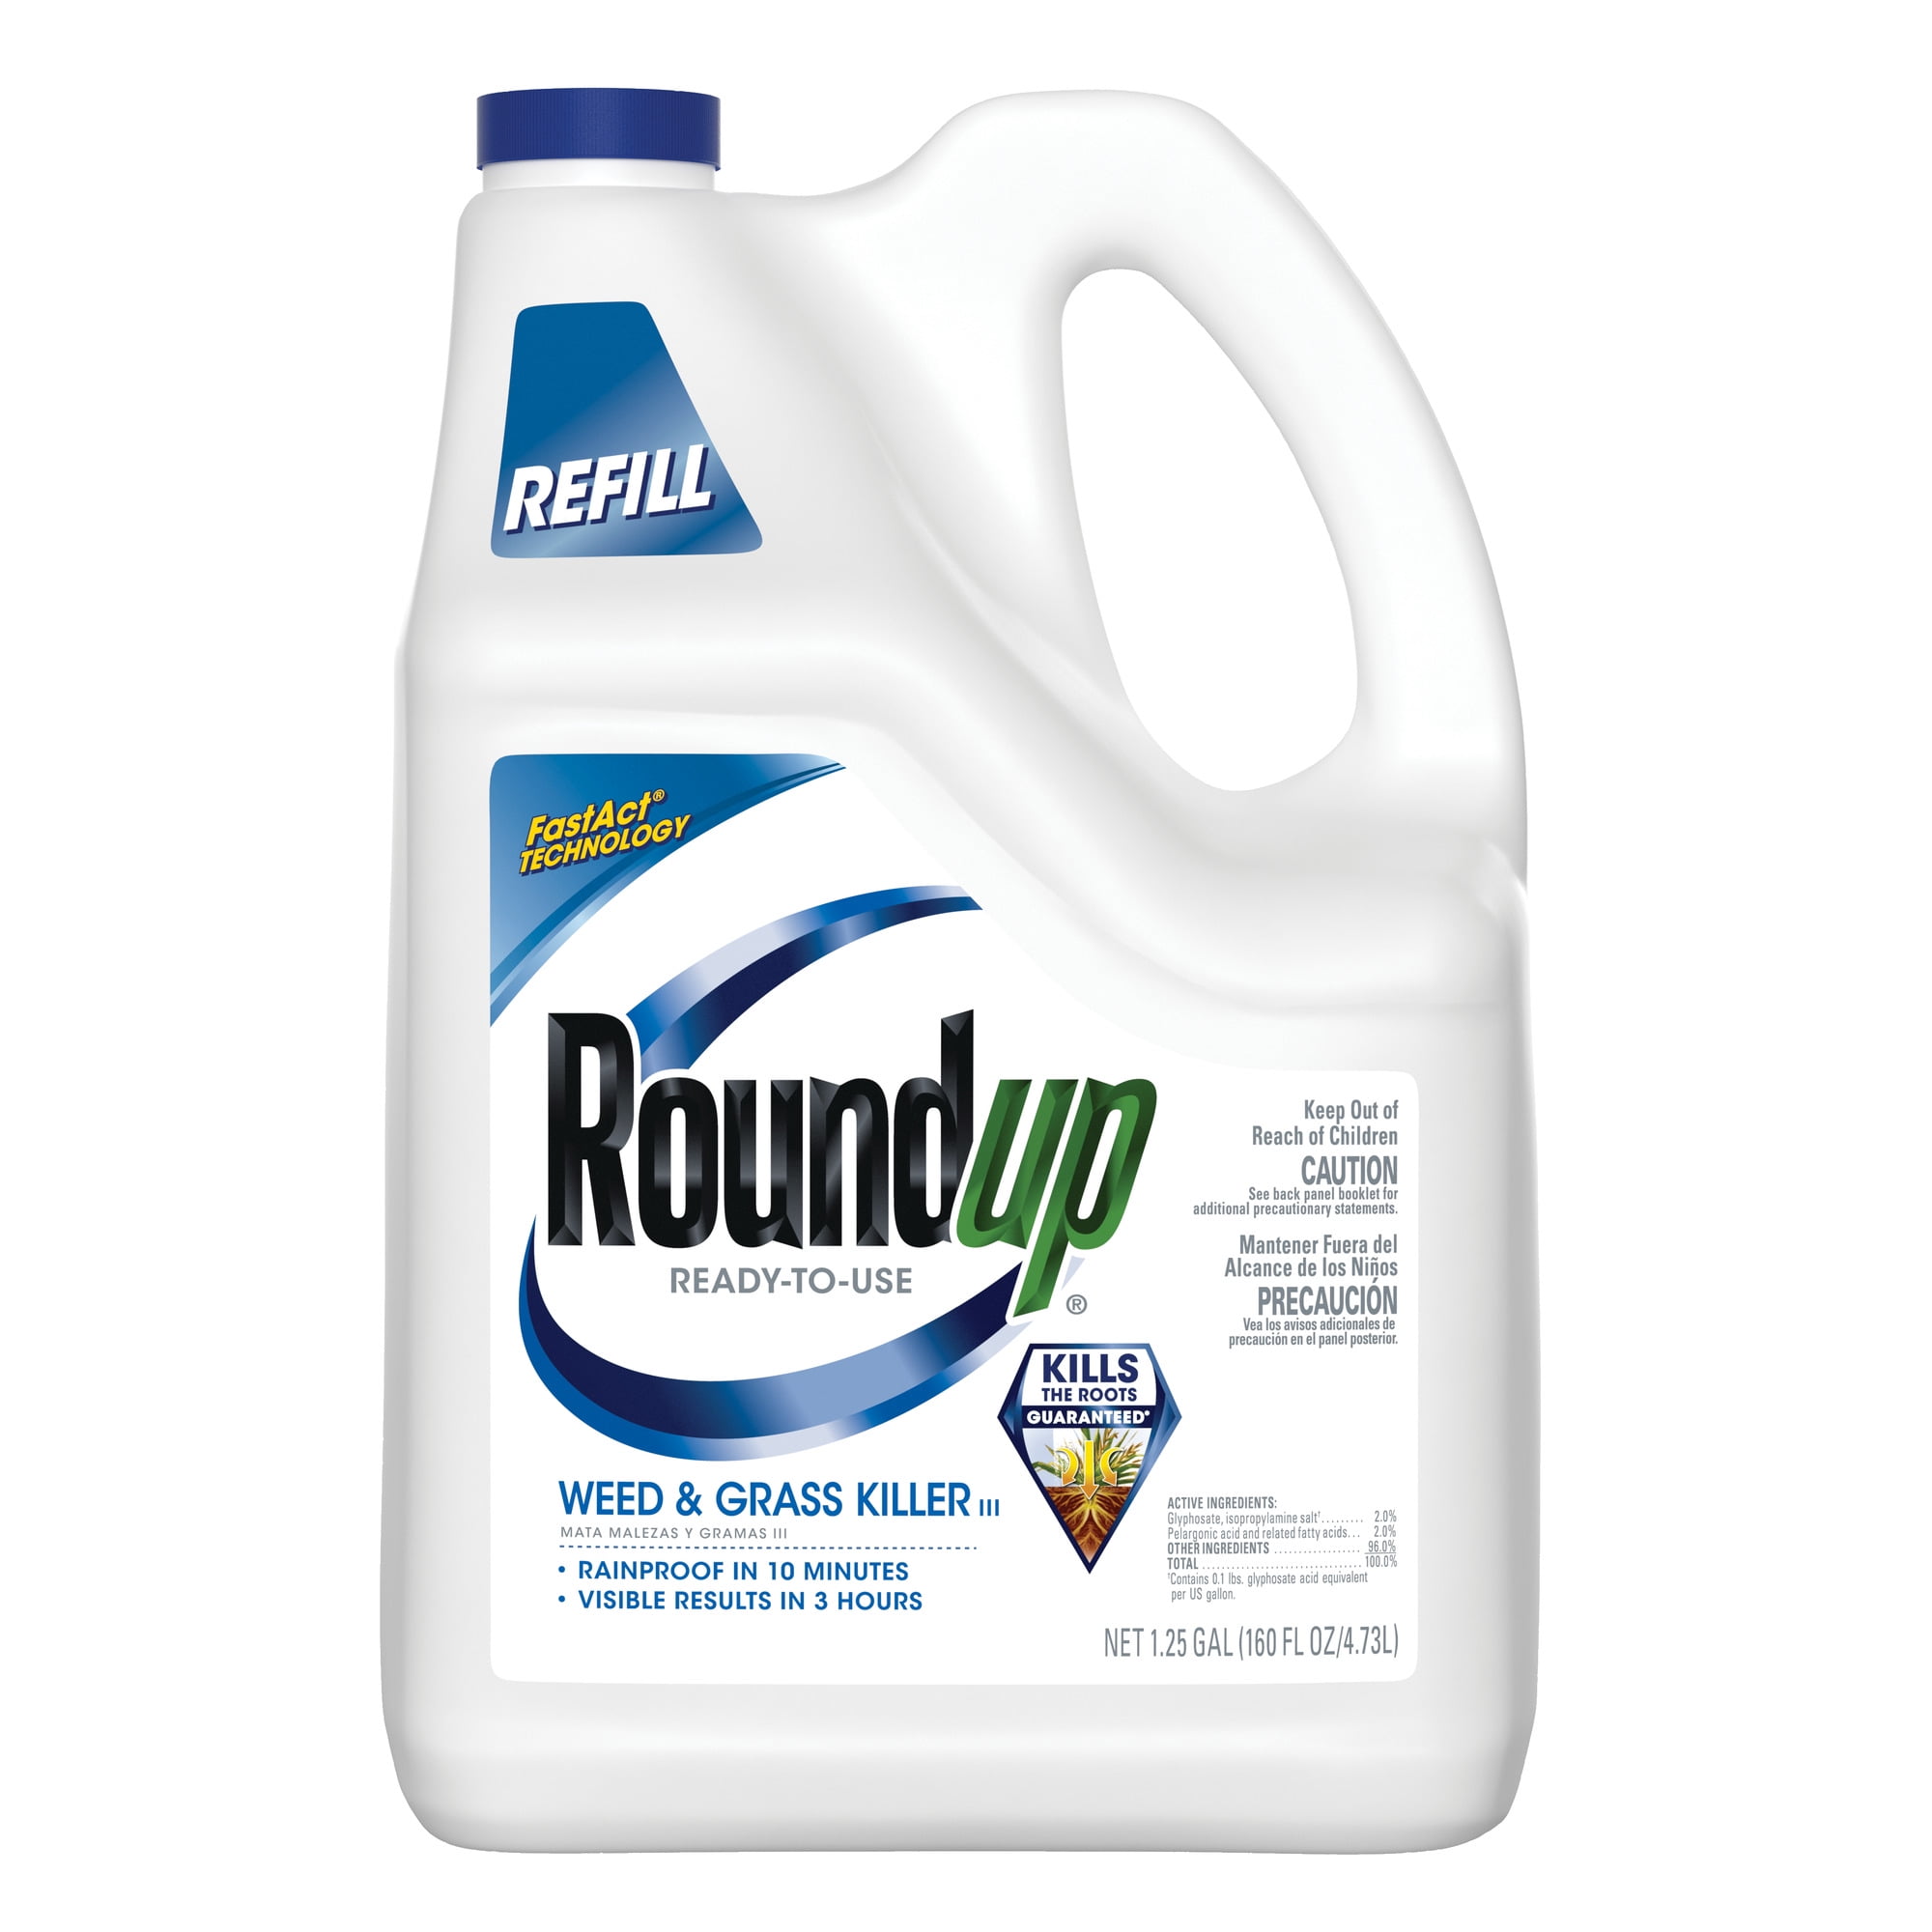 Roundup Ready-to-Use Weed & Killer 1.25 gal. -